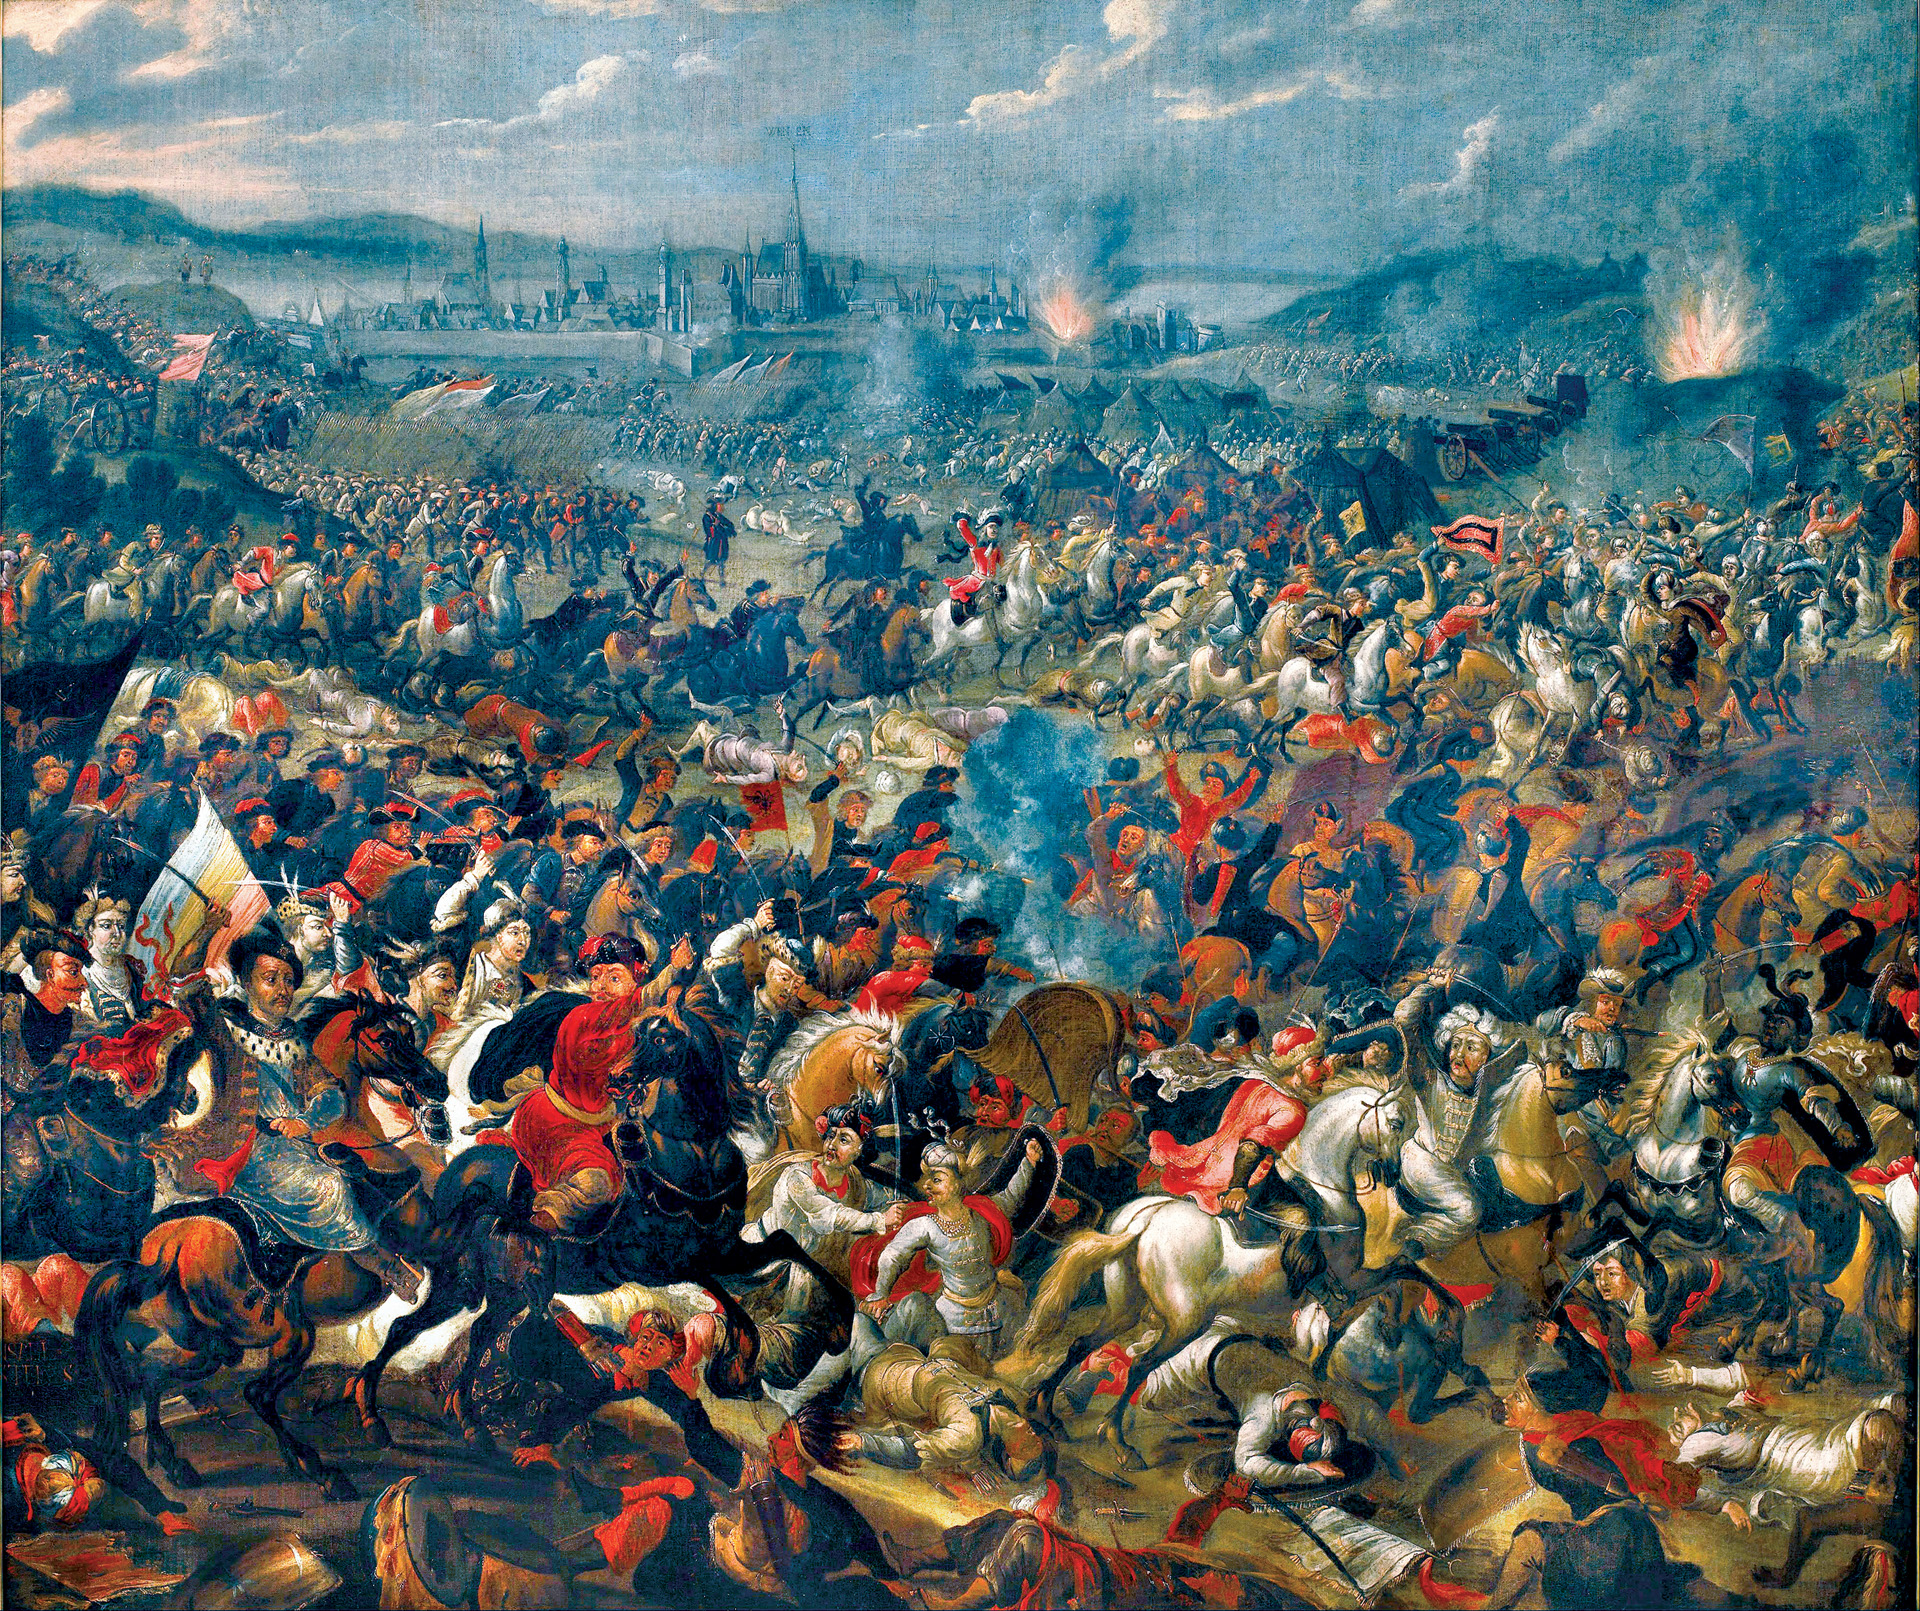 Because of his past successes fighting the Turks, Polish King Jan Sobieski was given overall command of the Holy League's forces tasked with relieving Vienna from the besieging Ottoman army in 1683. During the climactic day-long battle on September 12, the Husaria charged into the enemy camp, routing the Turks.